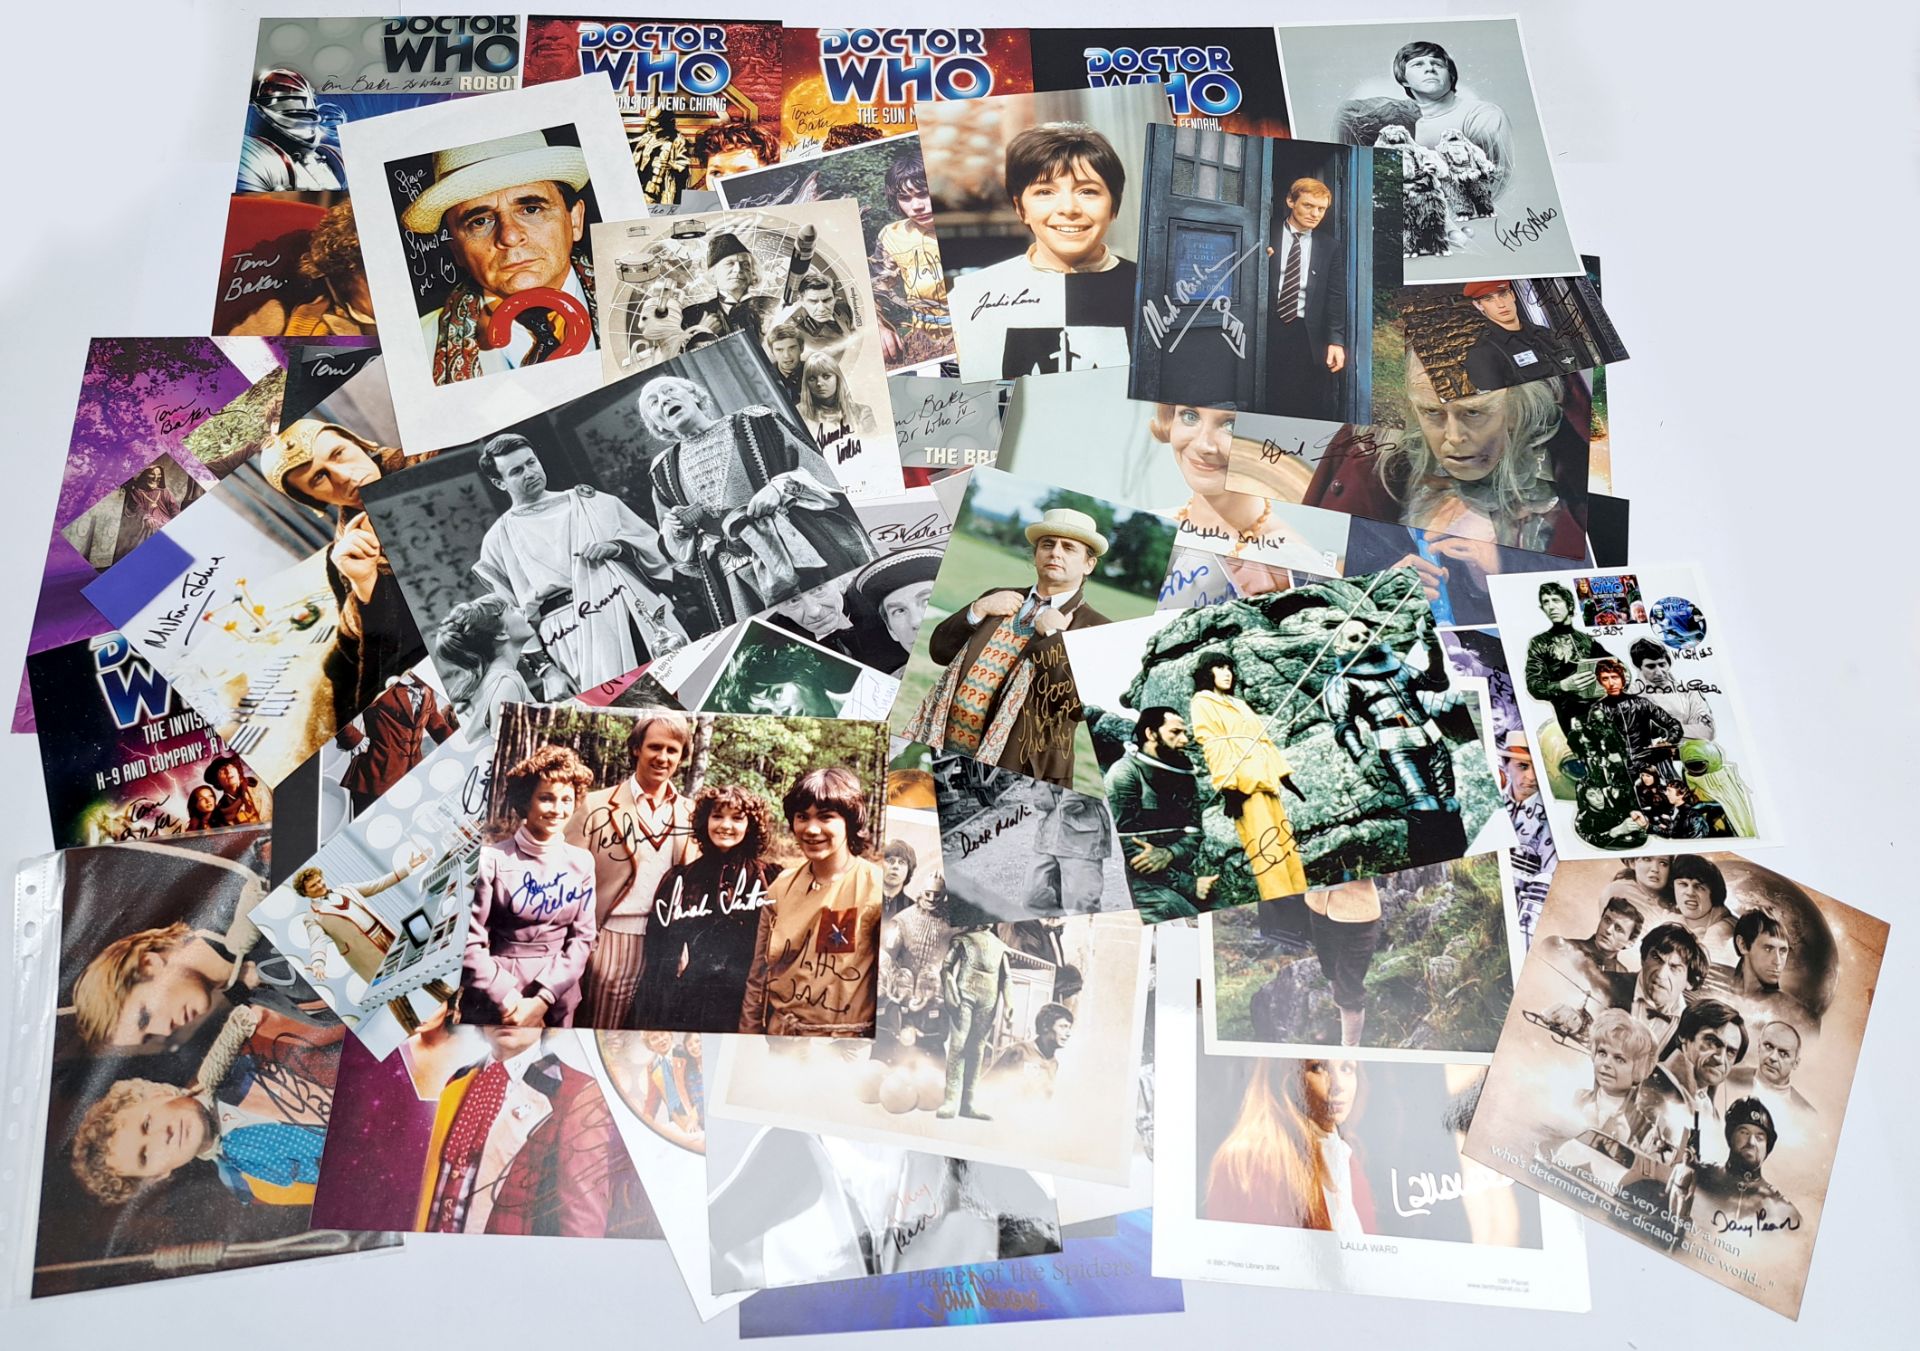 Large quantity of Doctor Who related signed photos & pictures